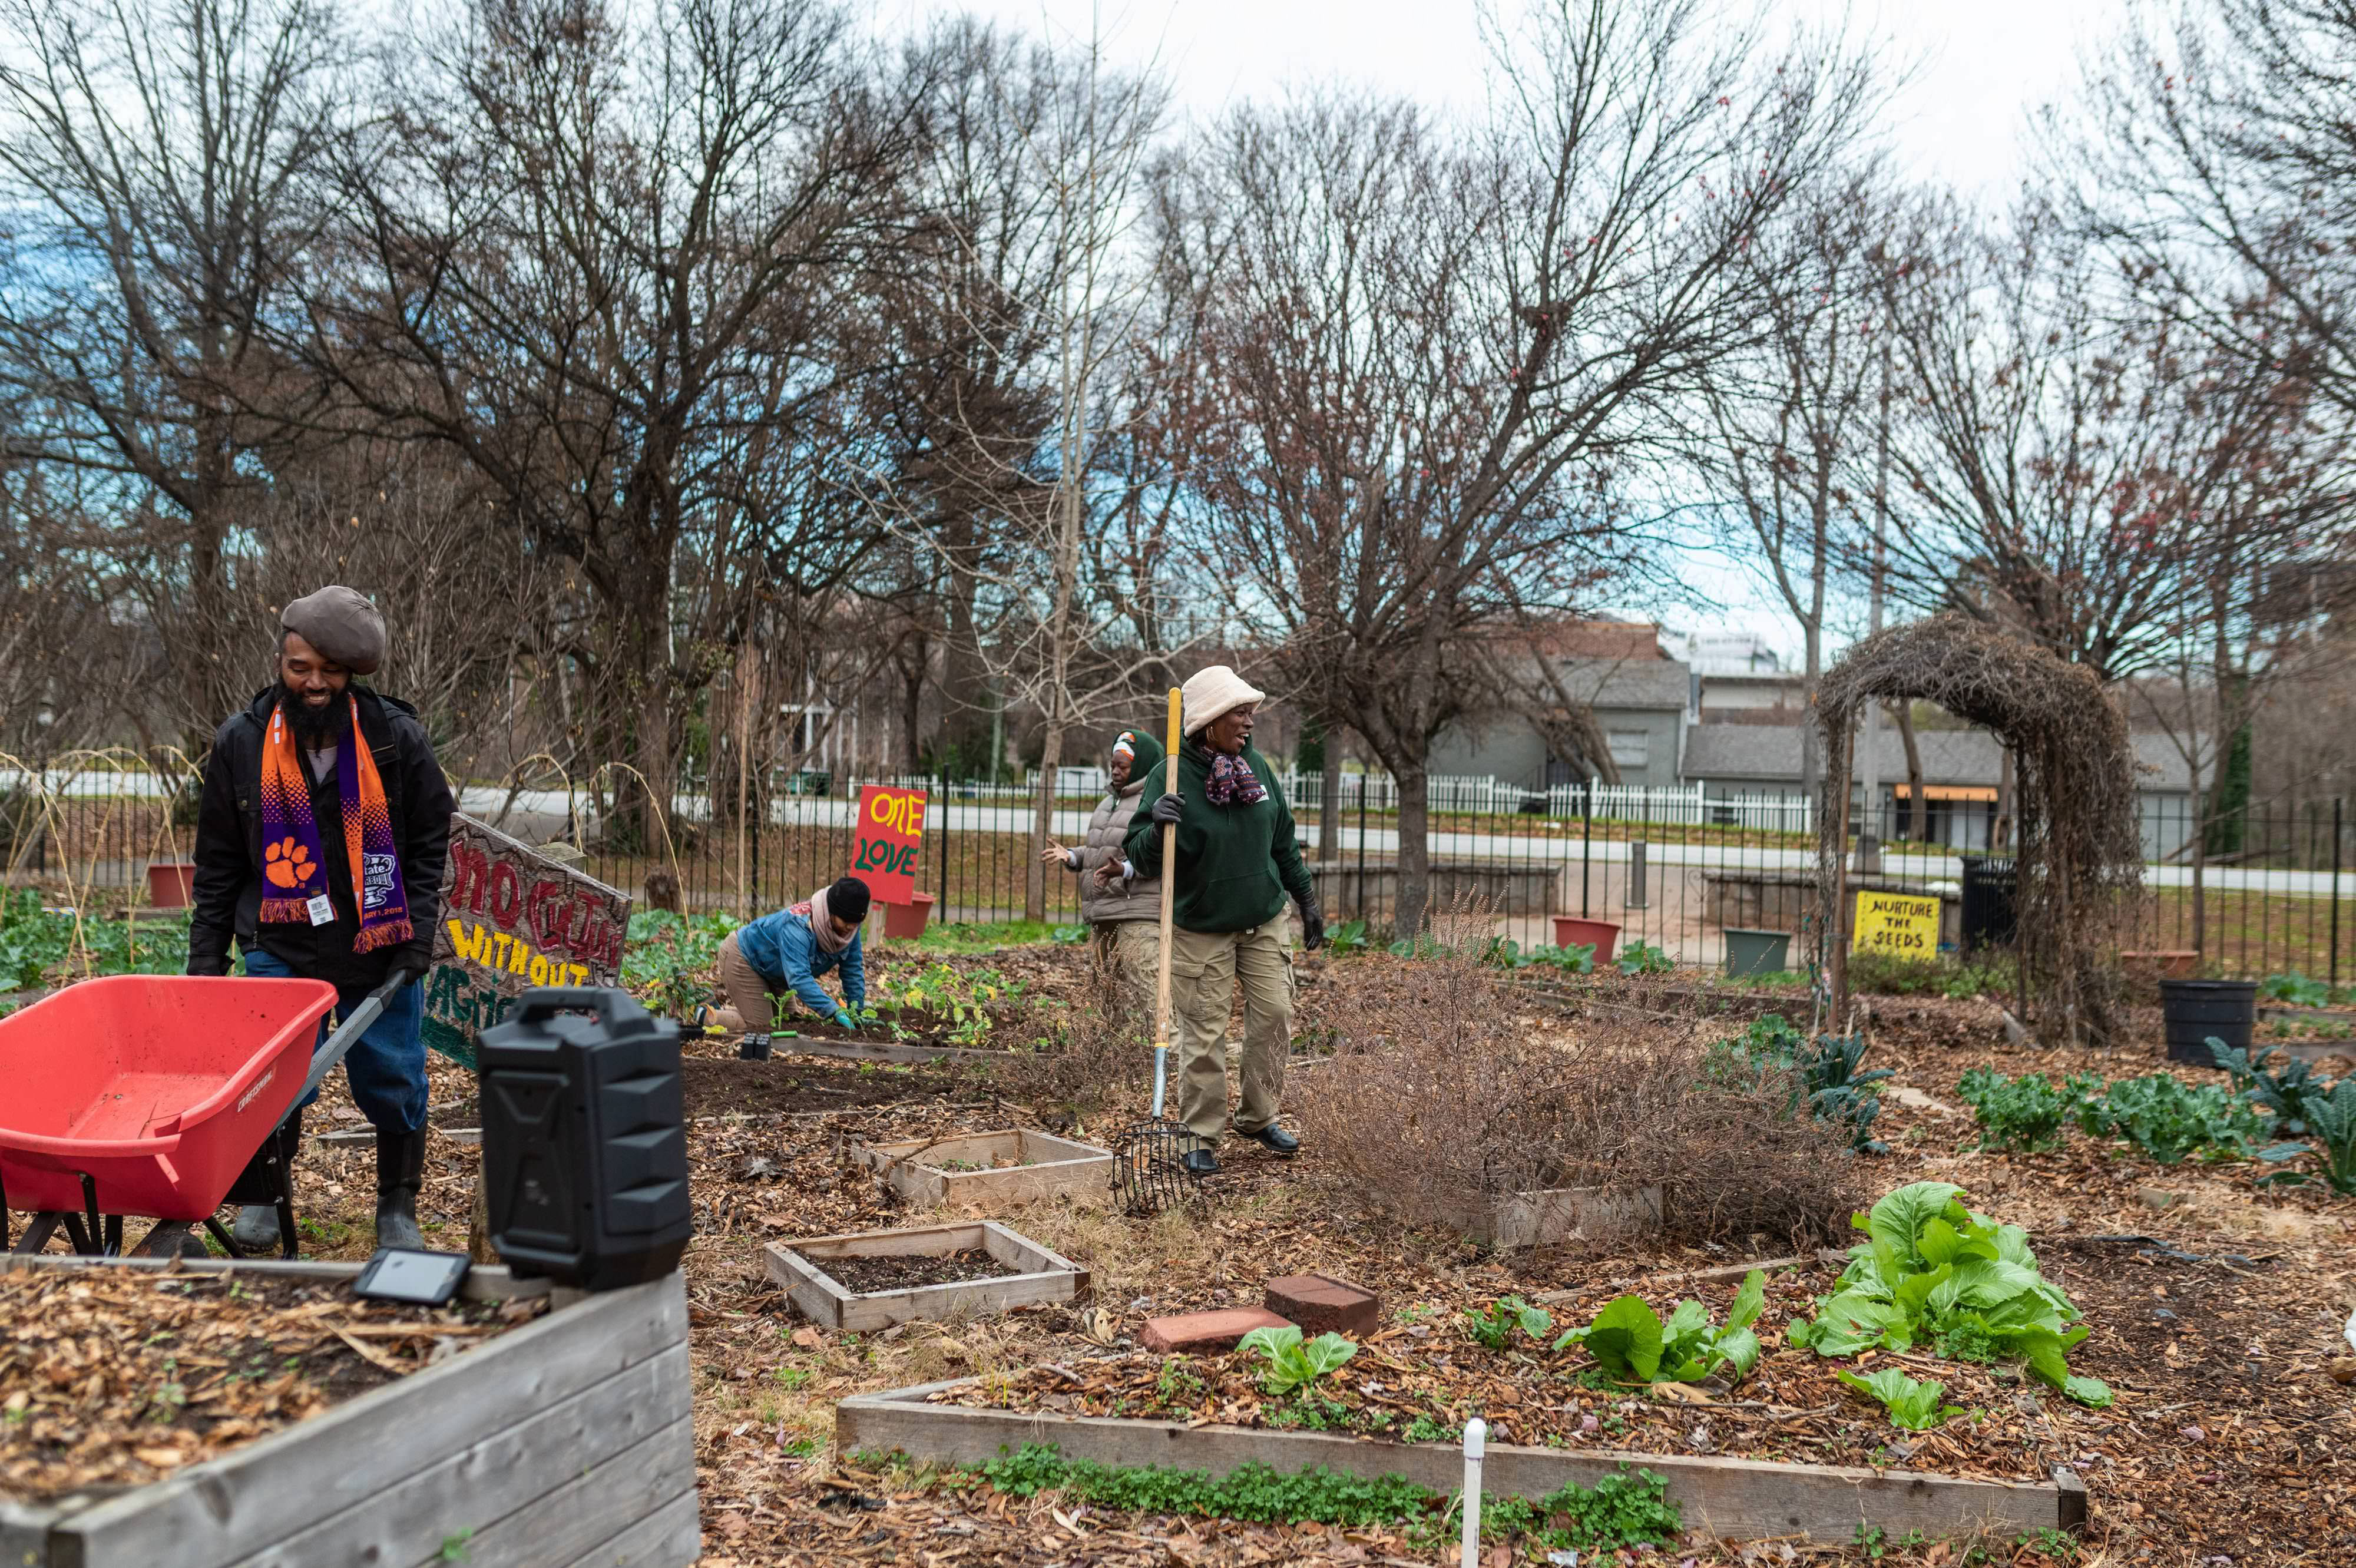 A group of people work together at a community garden.